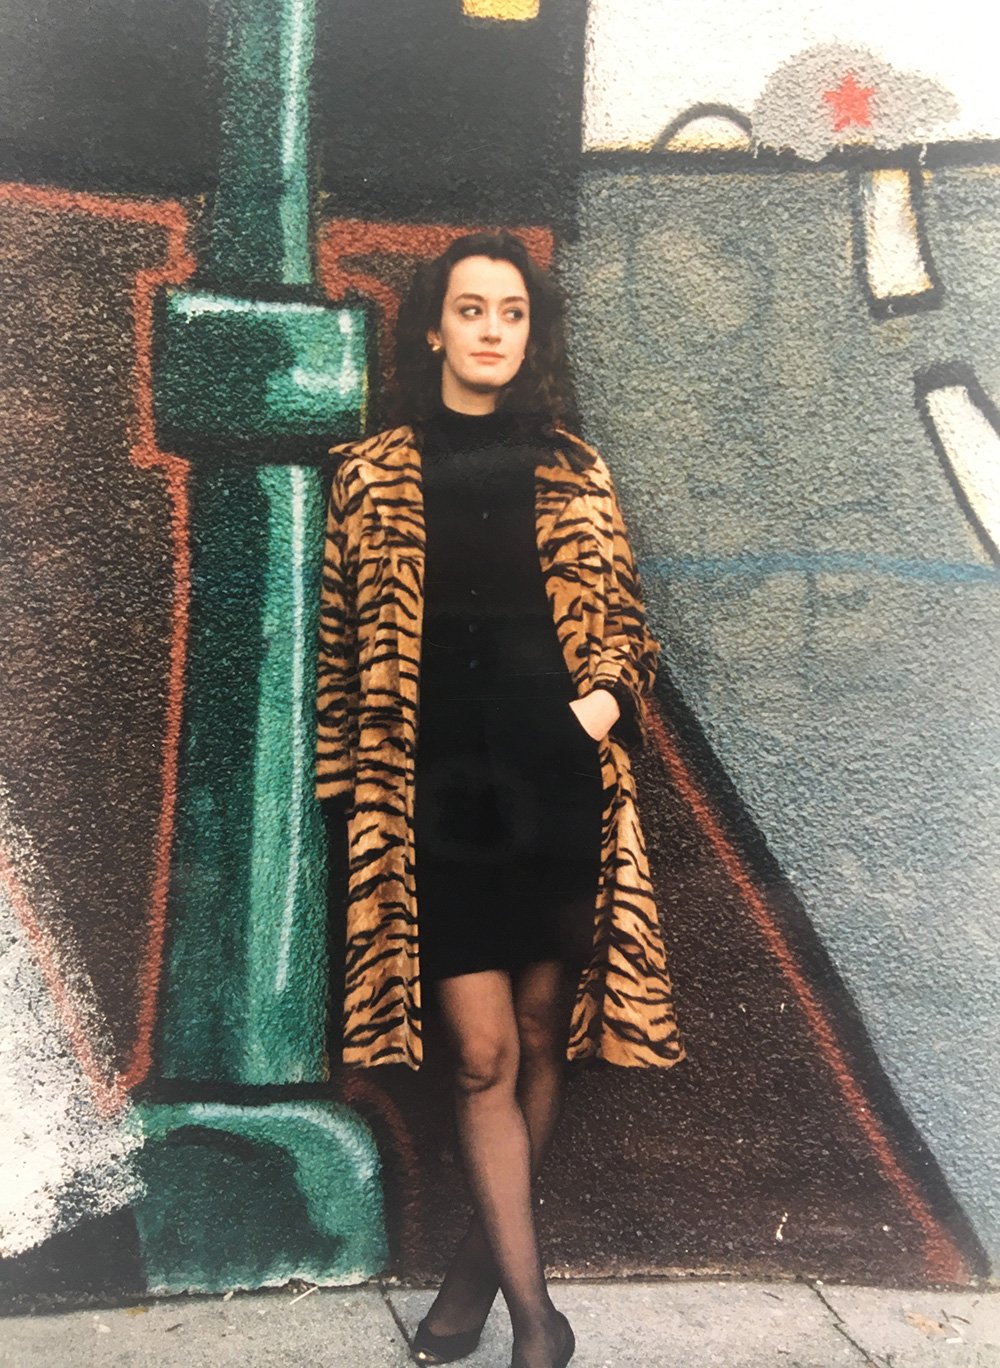 Dorothy Woodend stands against a graffiti wall in a short black dress, long tiger-print jacket, black tights and black shoes. She has long dark hair and is looking to the right.